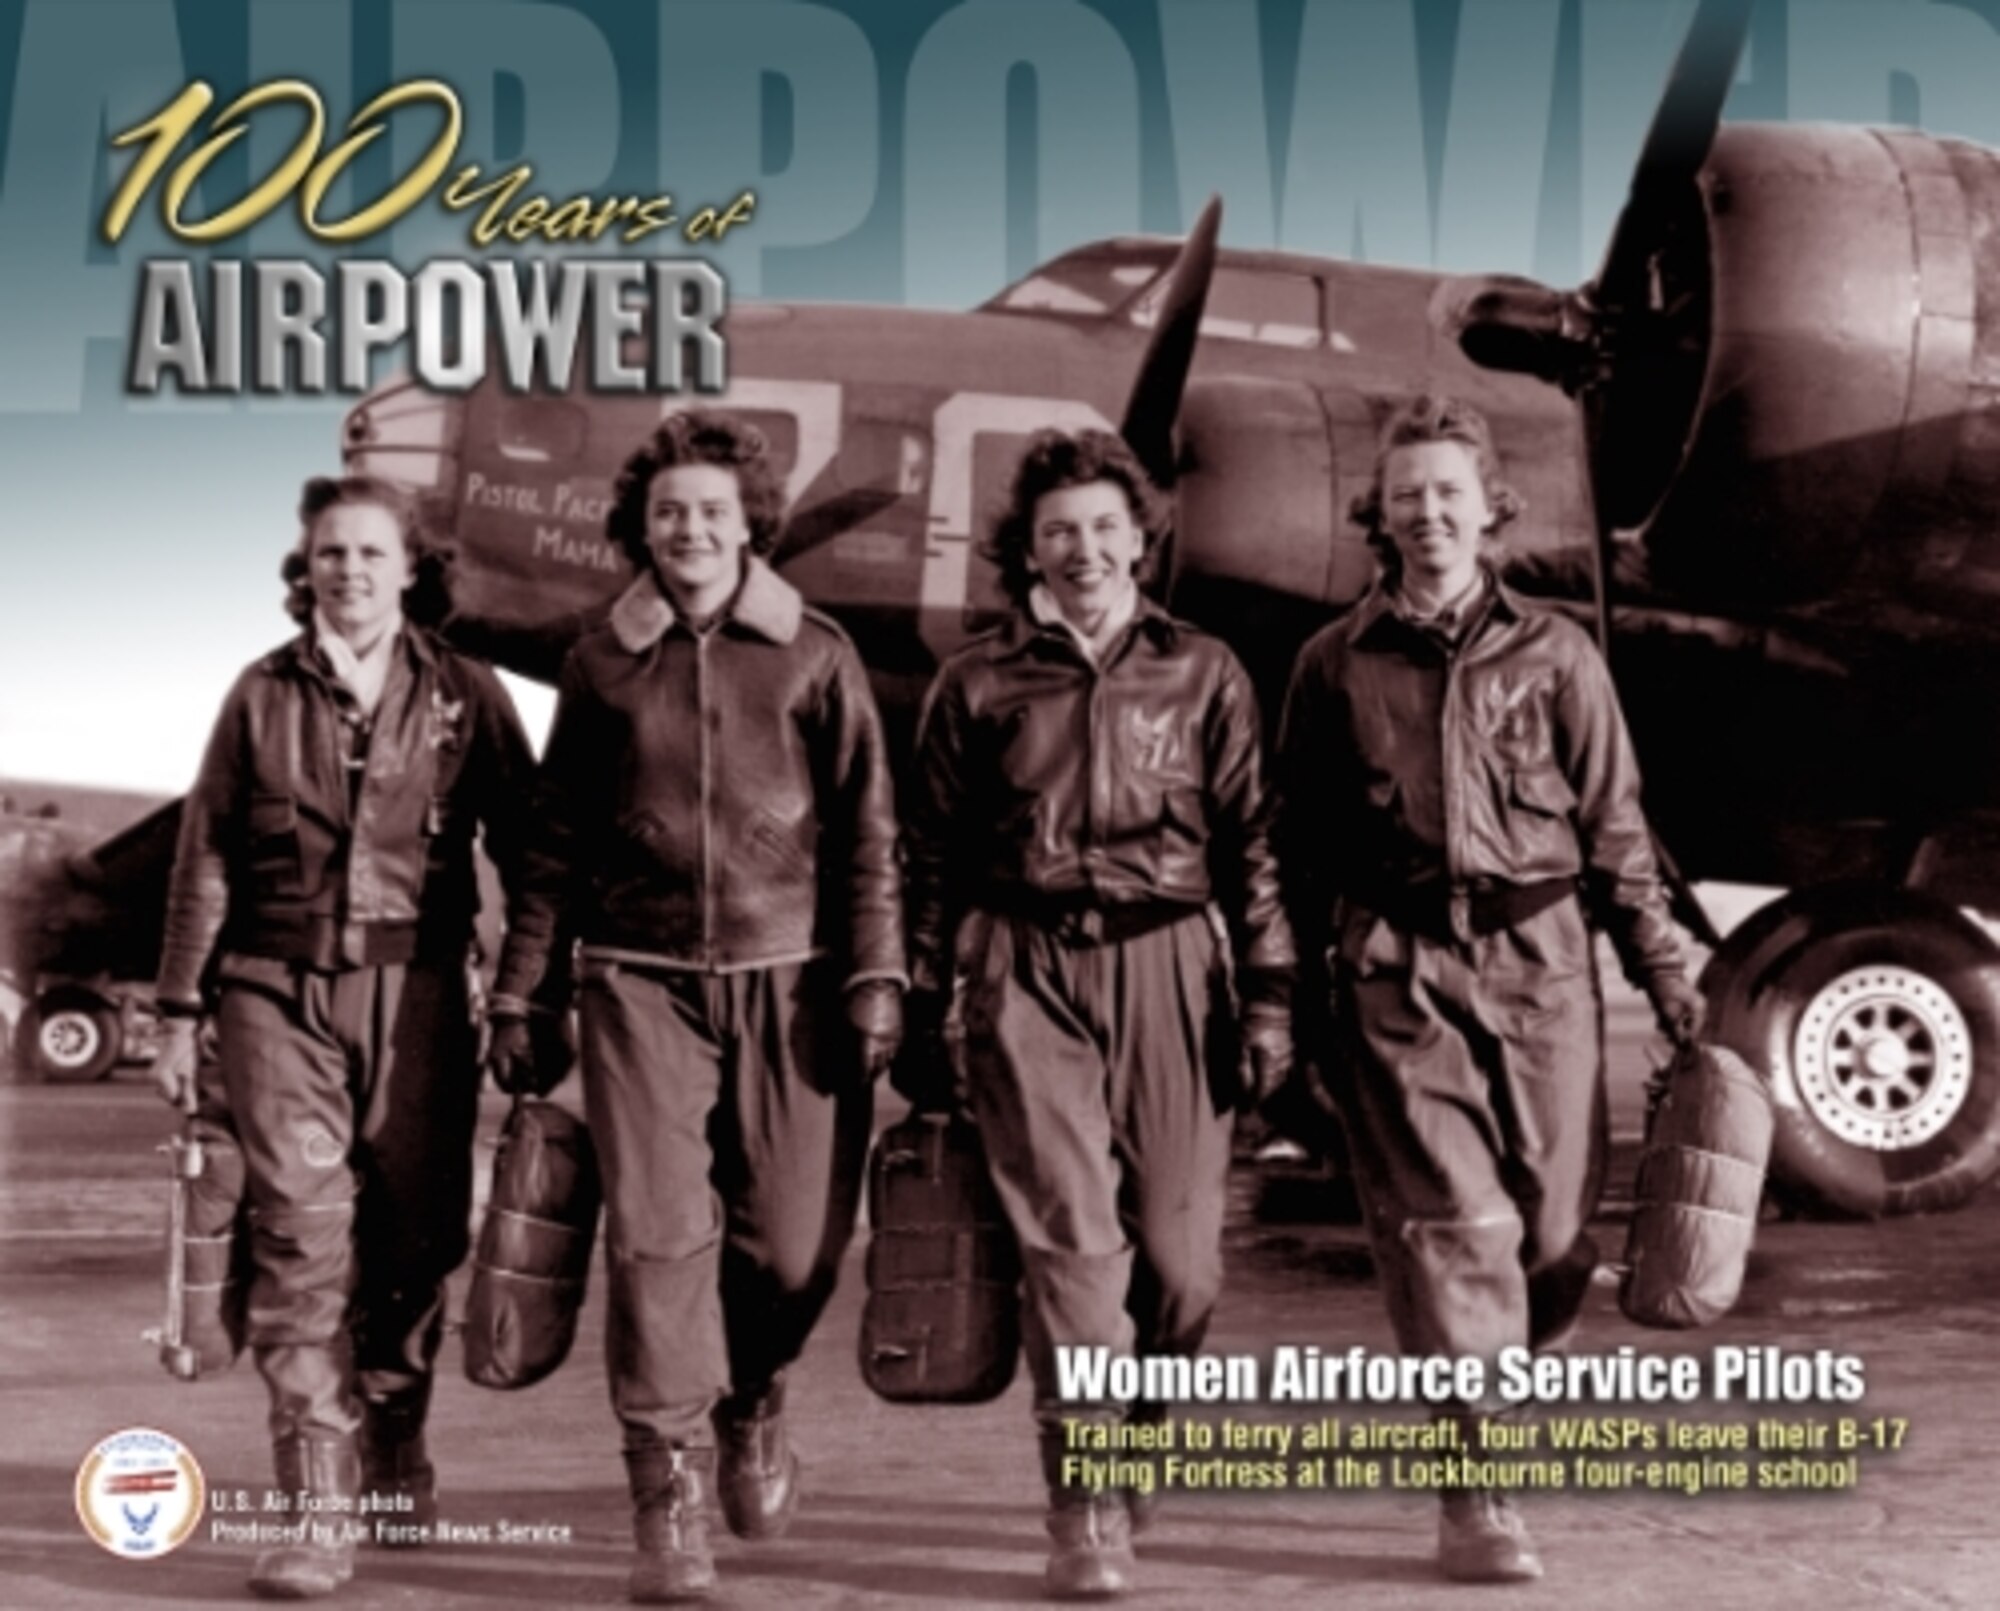 Women Airforce Service Pilots trained to ferry all aircraft